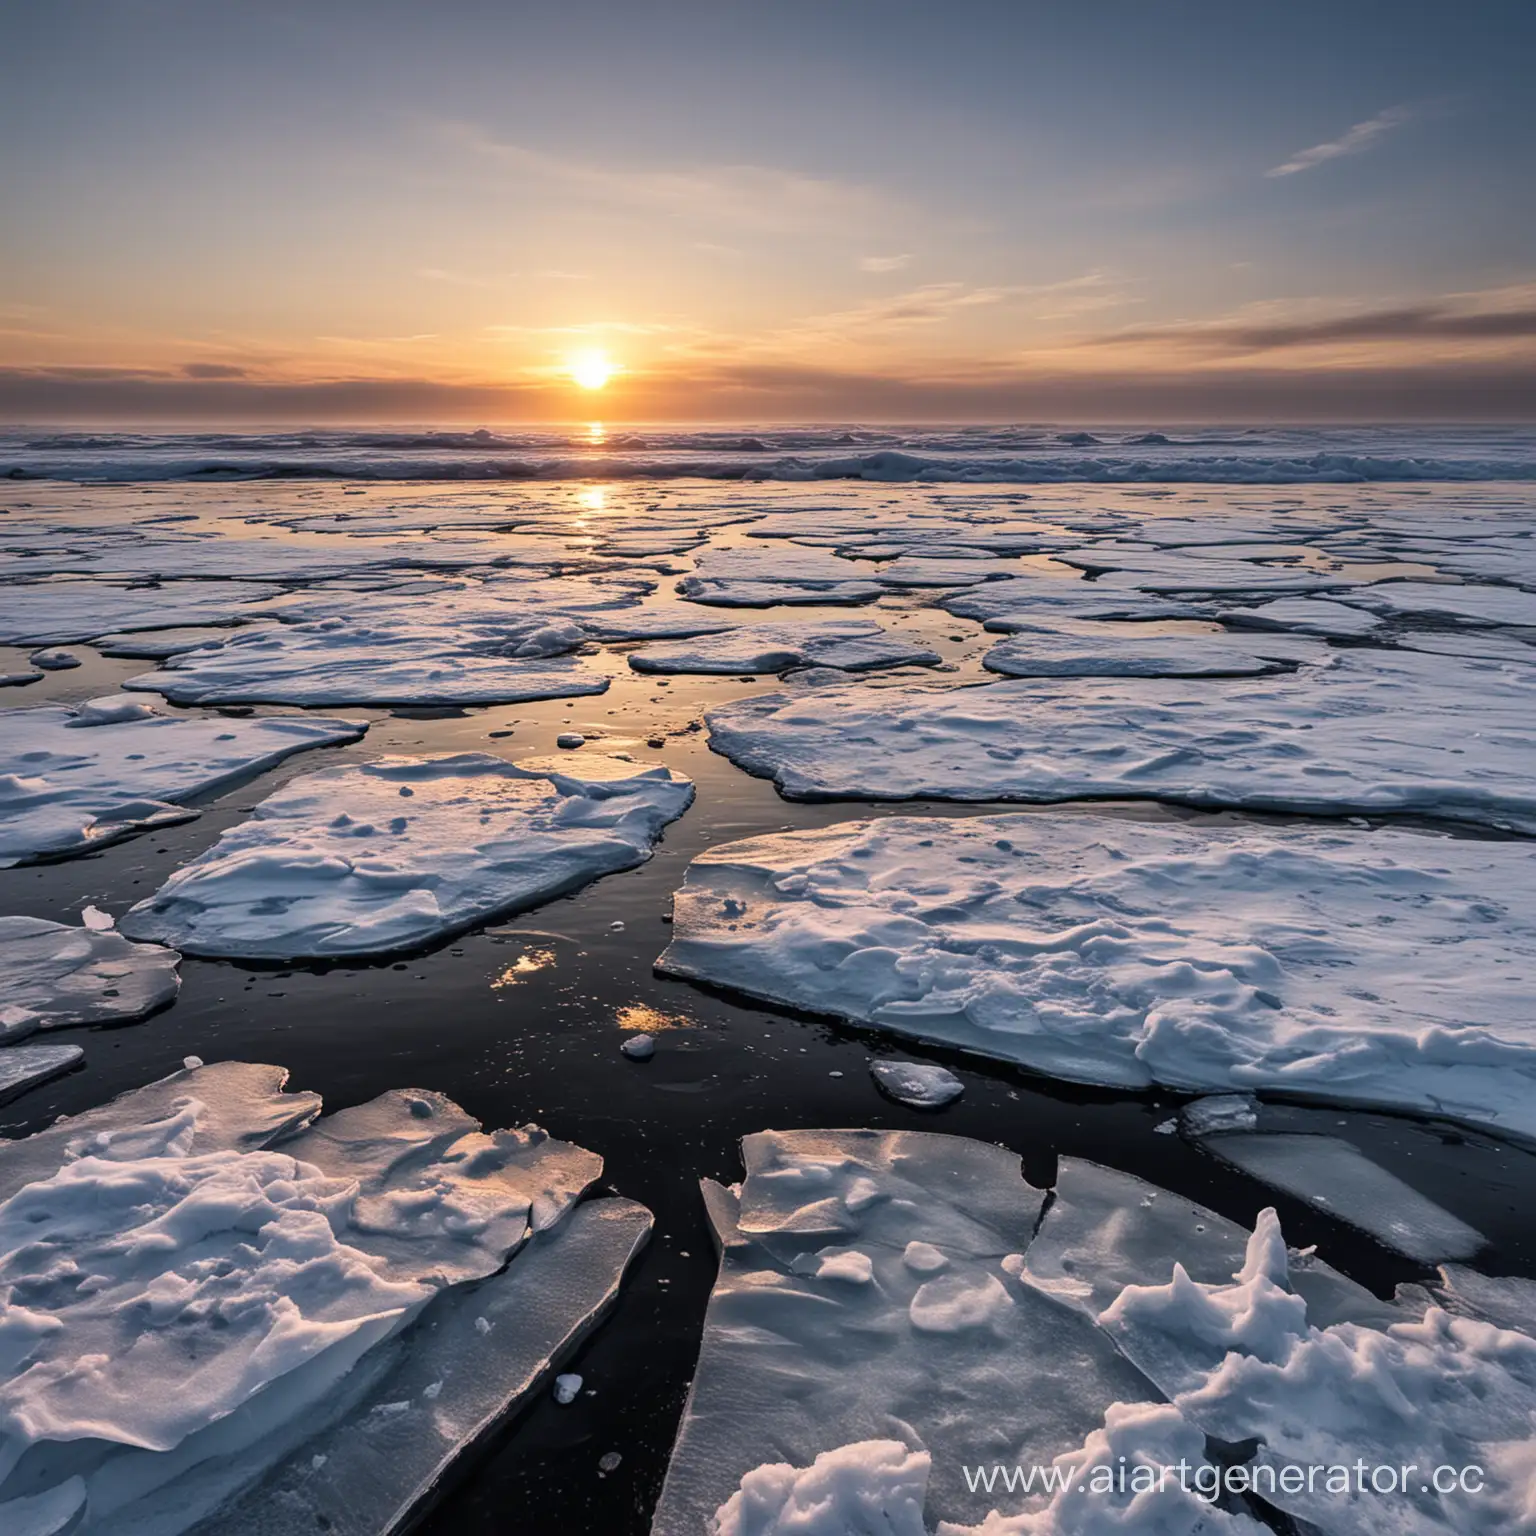 Tranquil-Winter-Ocean-Scene-with-Ice-Floes-at-Sunset